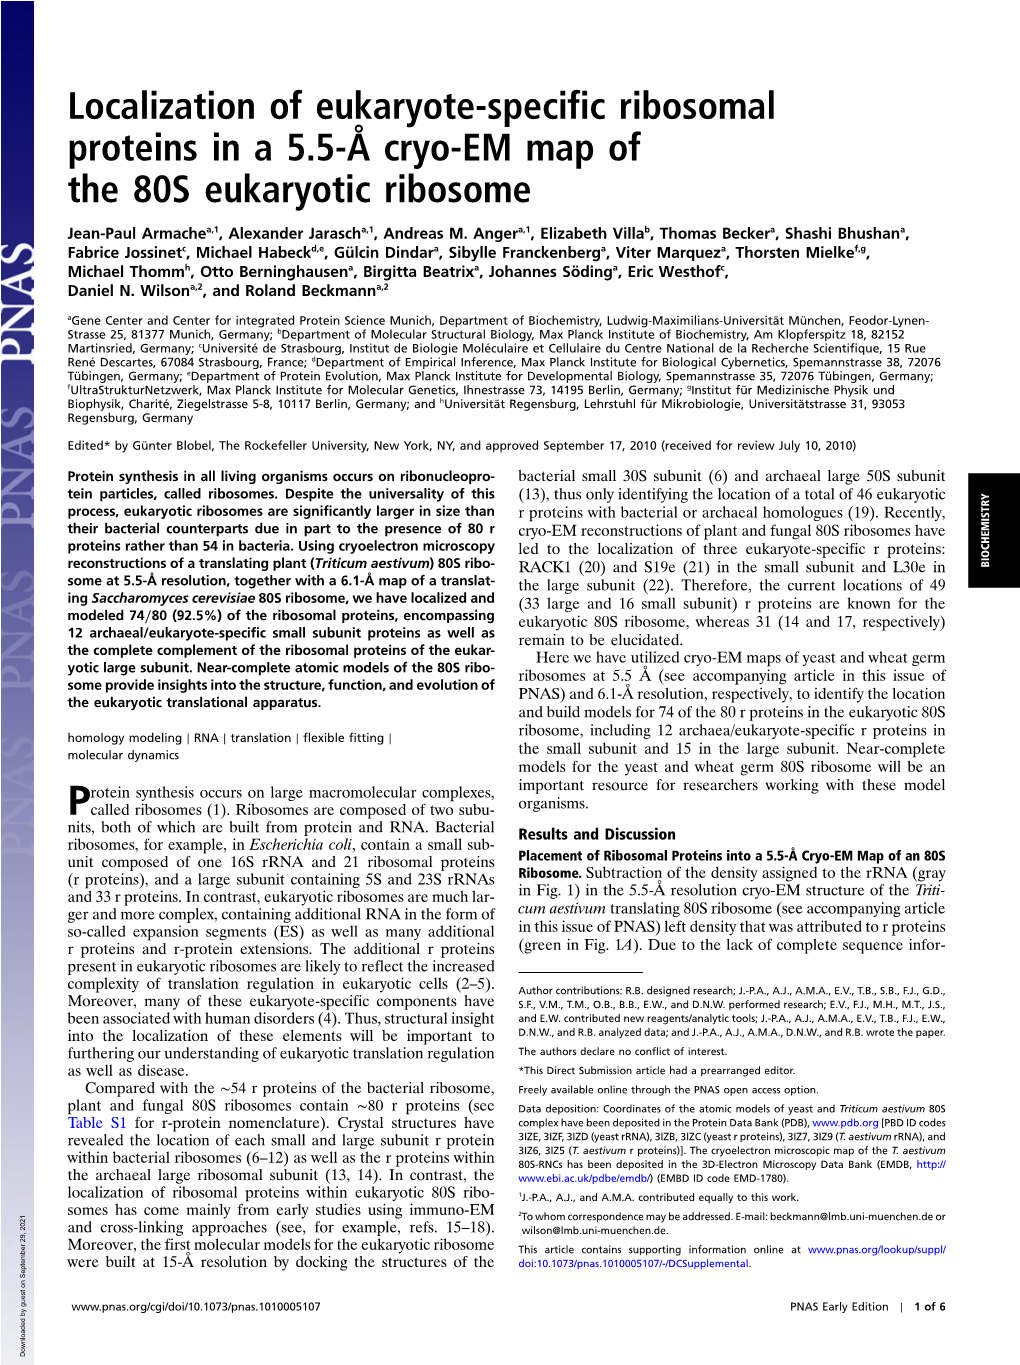 Localization of Eukaryote-Specific Ribosomal Proteins in a 5.5-Å Cryo-EM Map of the 80S Eukaryotic Ribosome